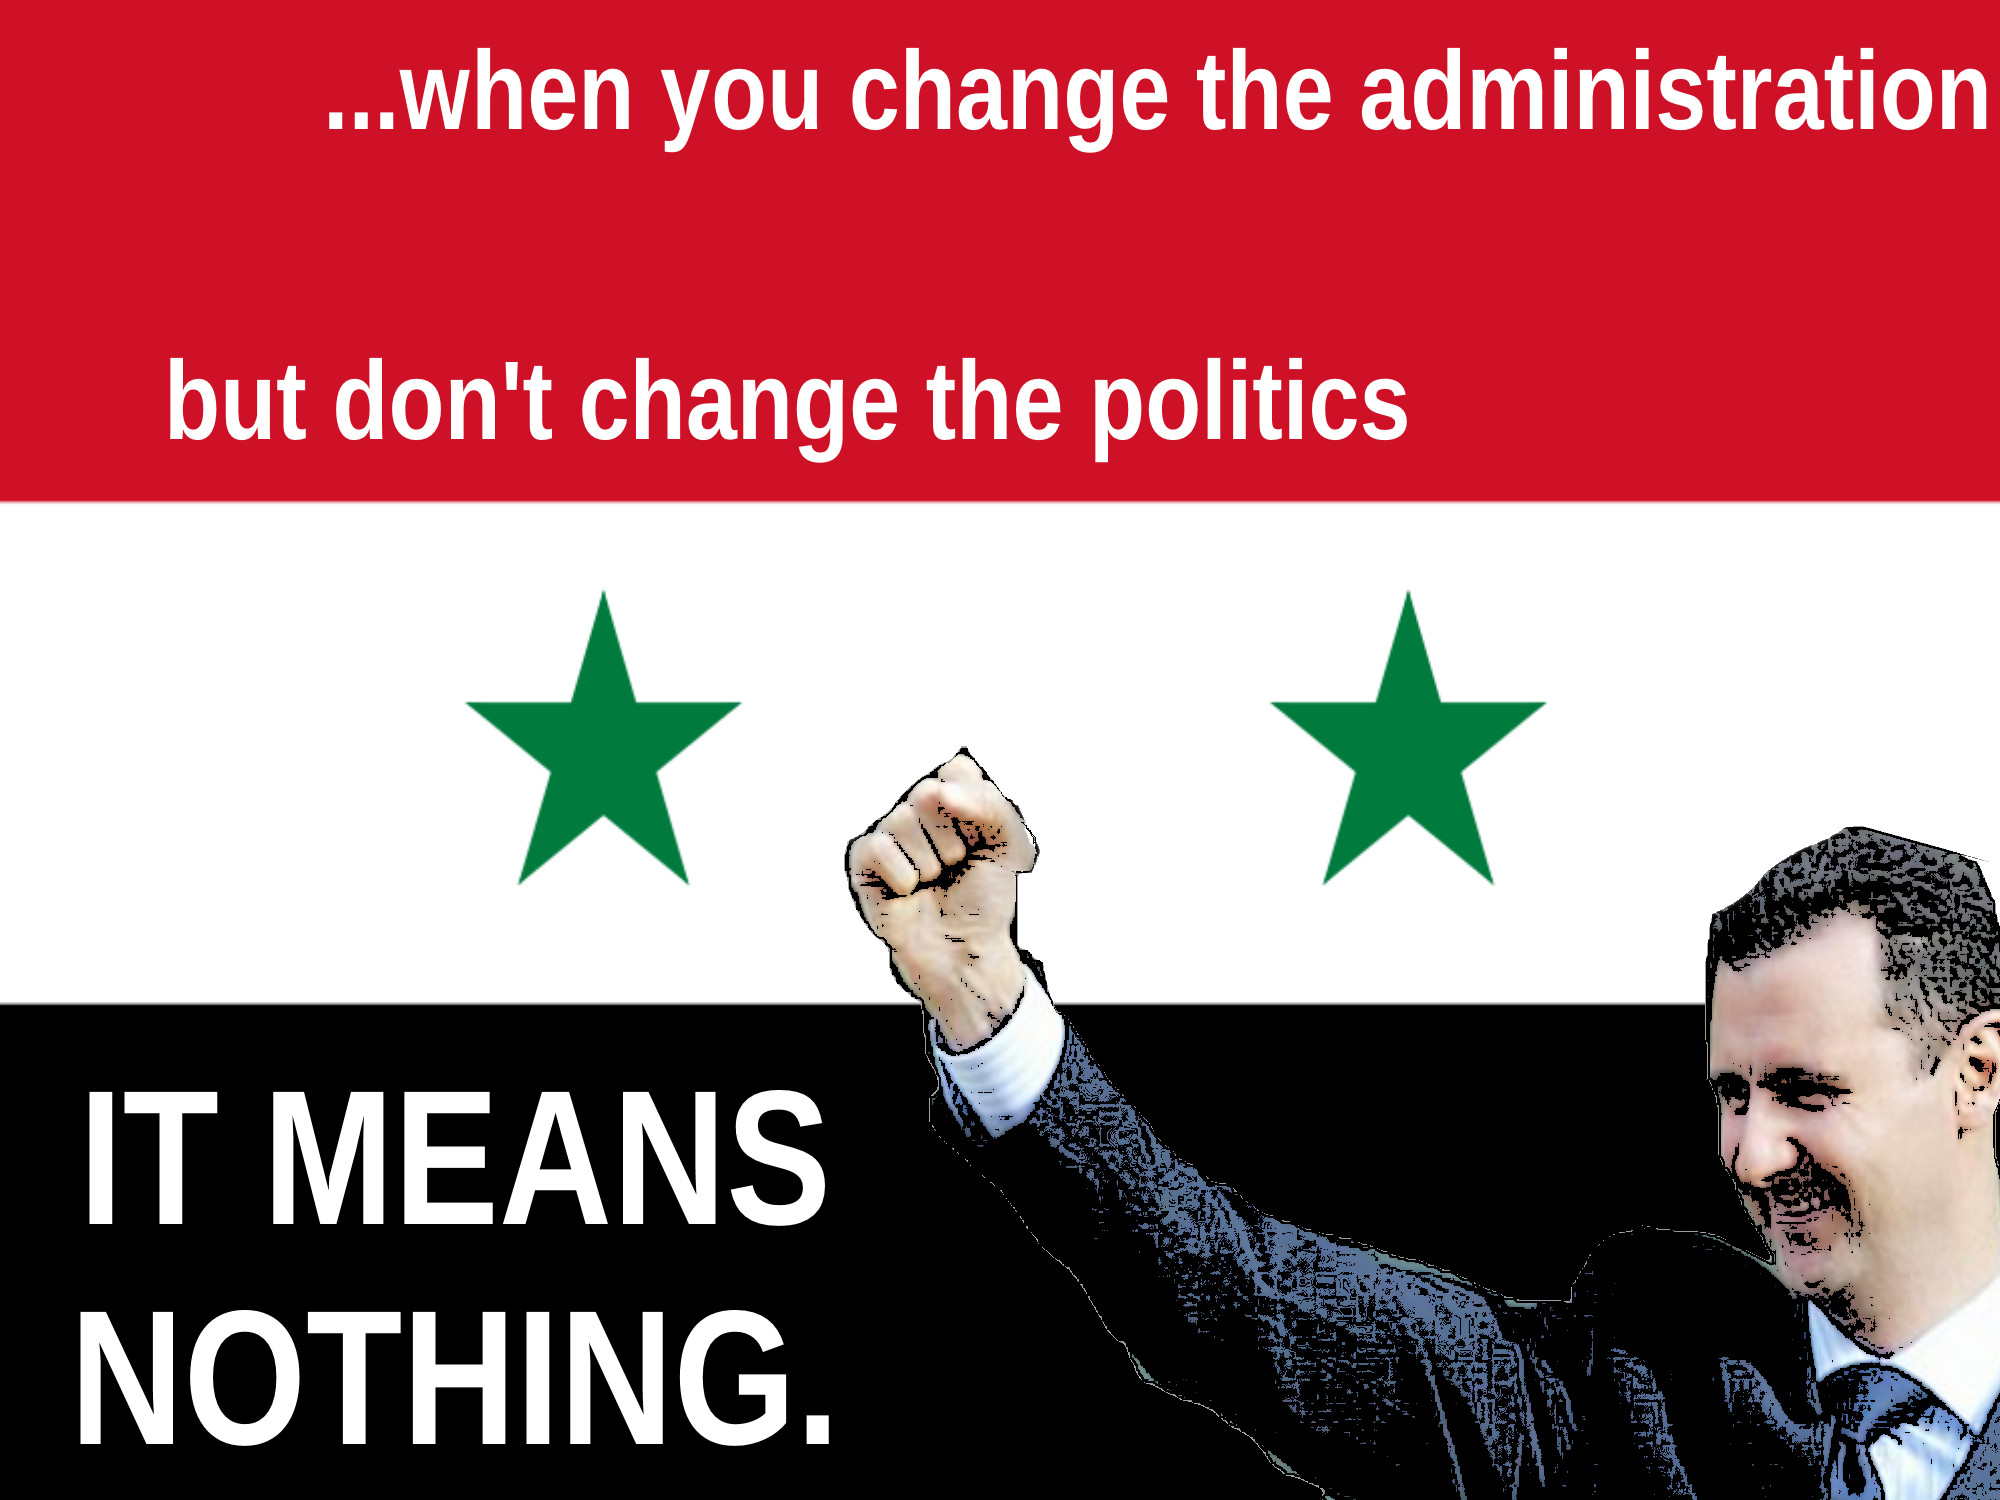 Bashar Al Assad Quotes
 I thought this quote from Bashar Al Assad particularly